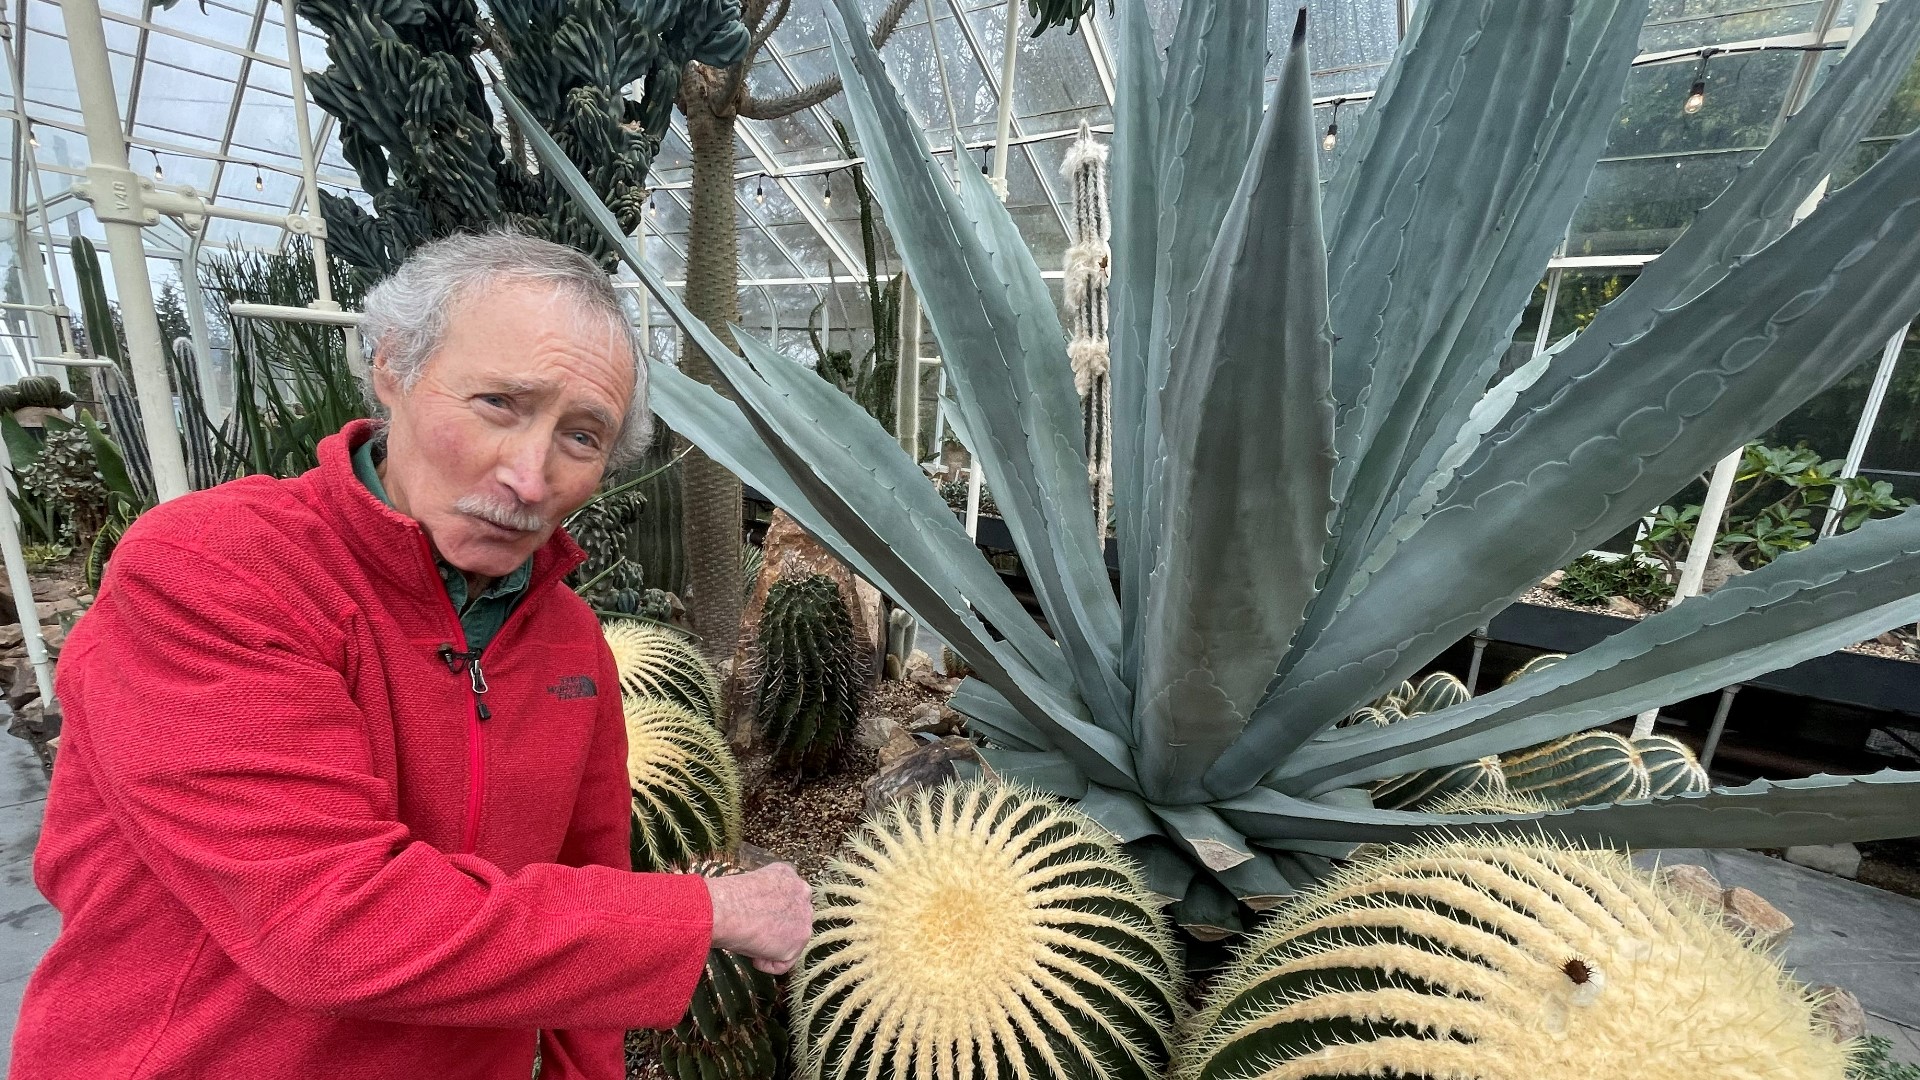 Meet some cacti and warm up at Seattle's Volunteer Park Conservatory. #k5evening